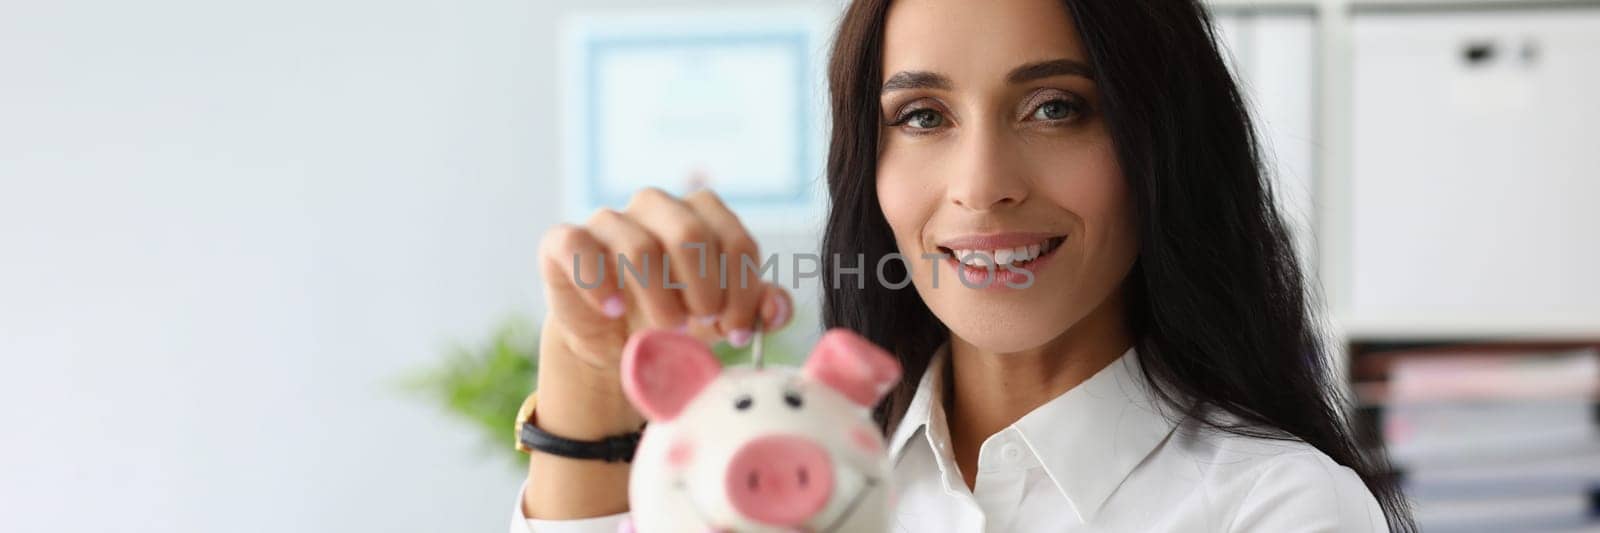 Portrait of smiling woman throwing coin into piggy bank. Favorable bank deposits and financial savings